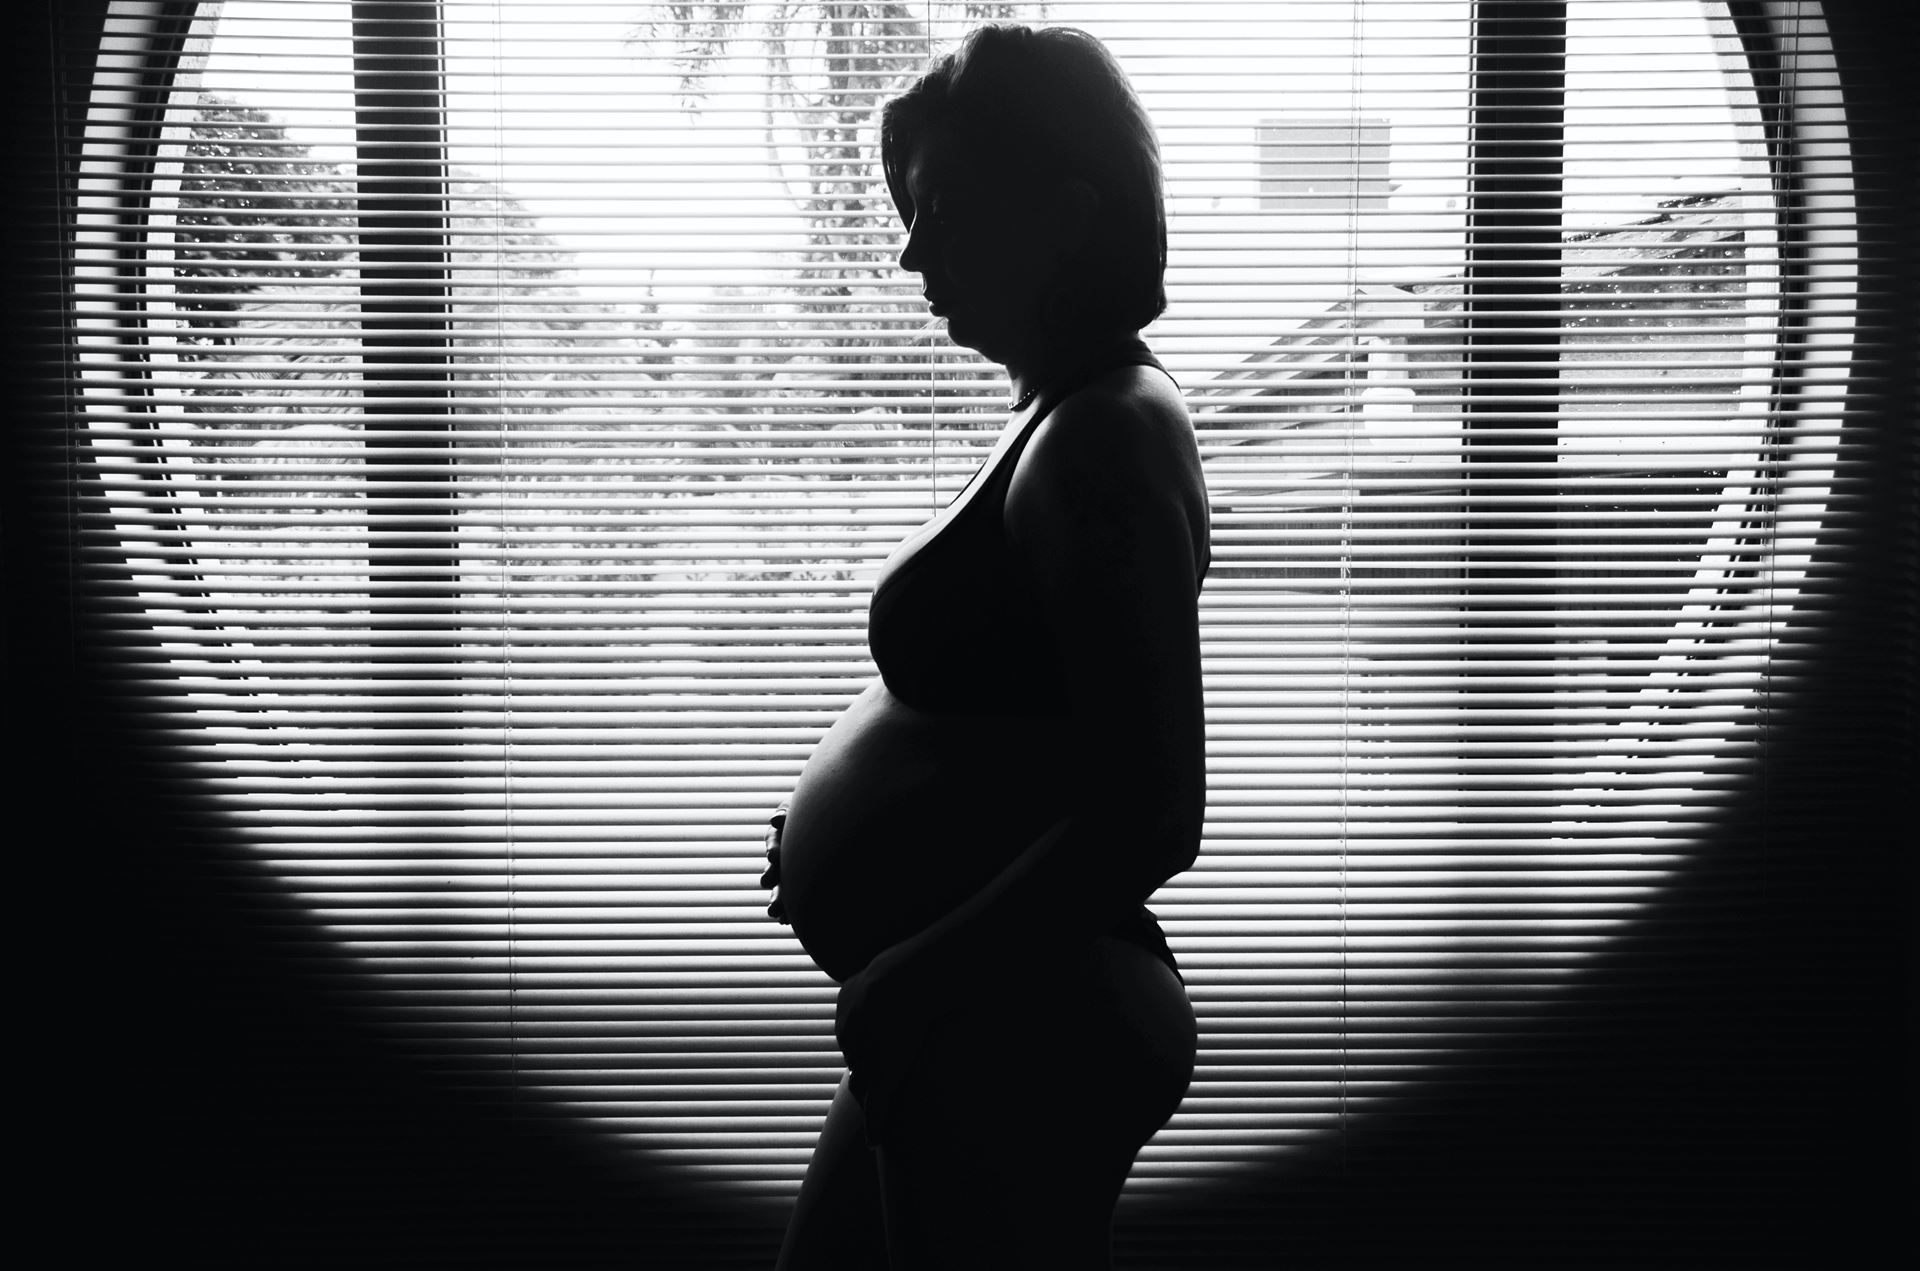 Black and white image of a pregnant individual's silhouette in front of a window with venetian blinds. Photo by Camila Cordeiro on Unsplash.